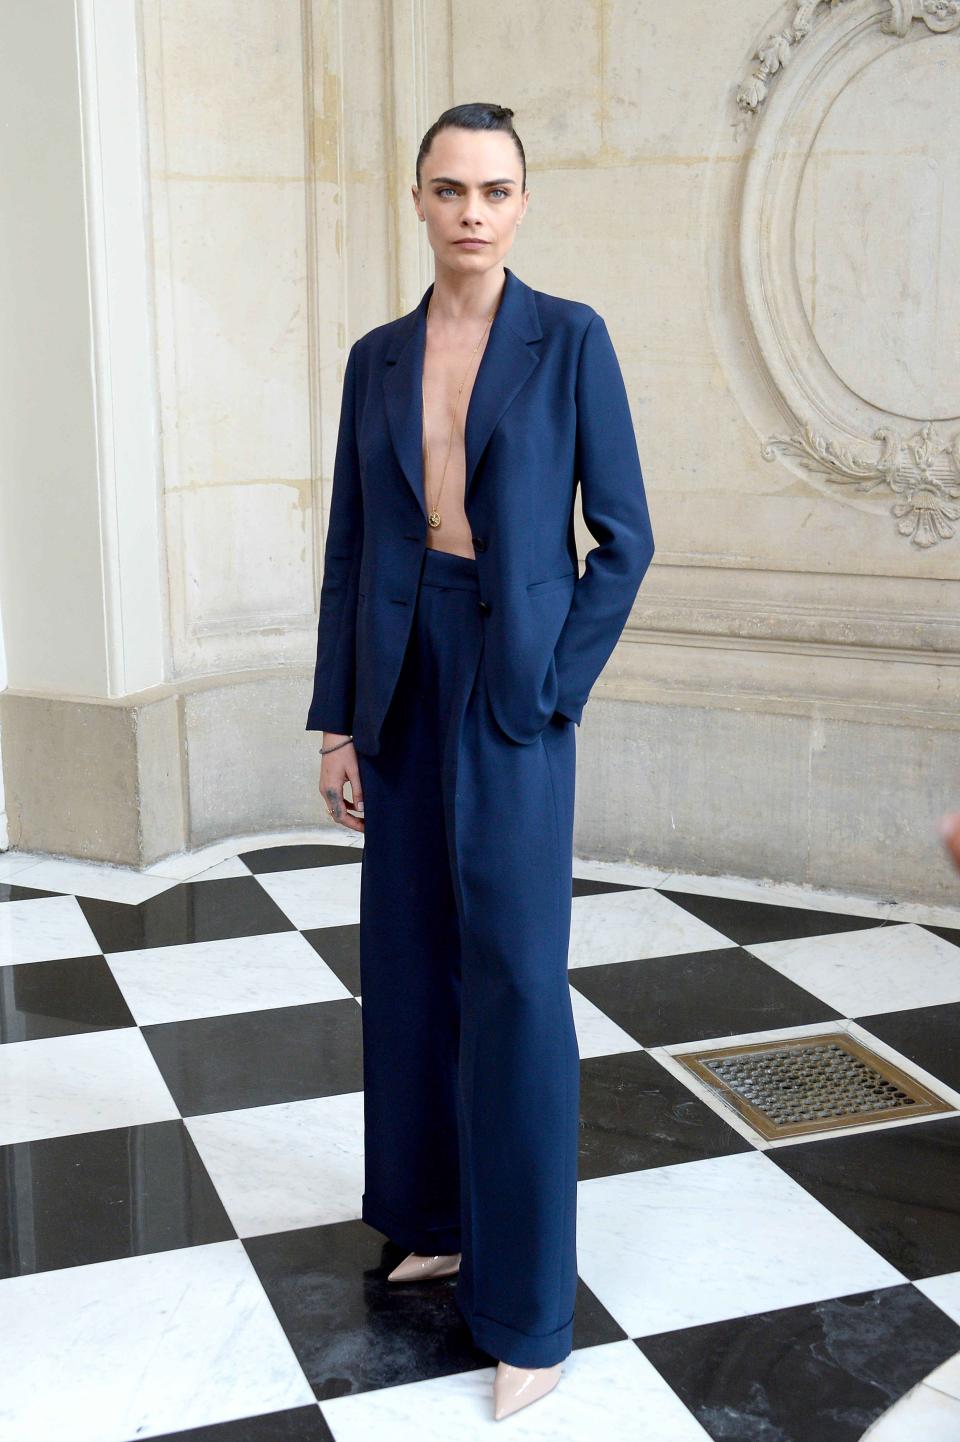 Cara Delevingne attends the Christian Dior Haute Couture Fall/Winter 2021/2022 show as part of Paris Fashion Week on July 05, 2021